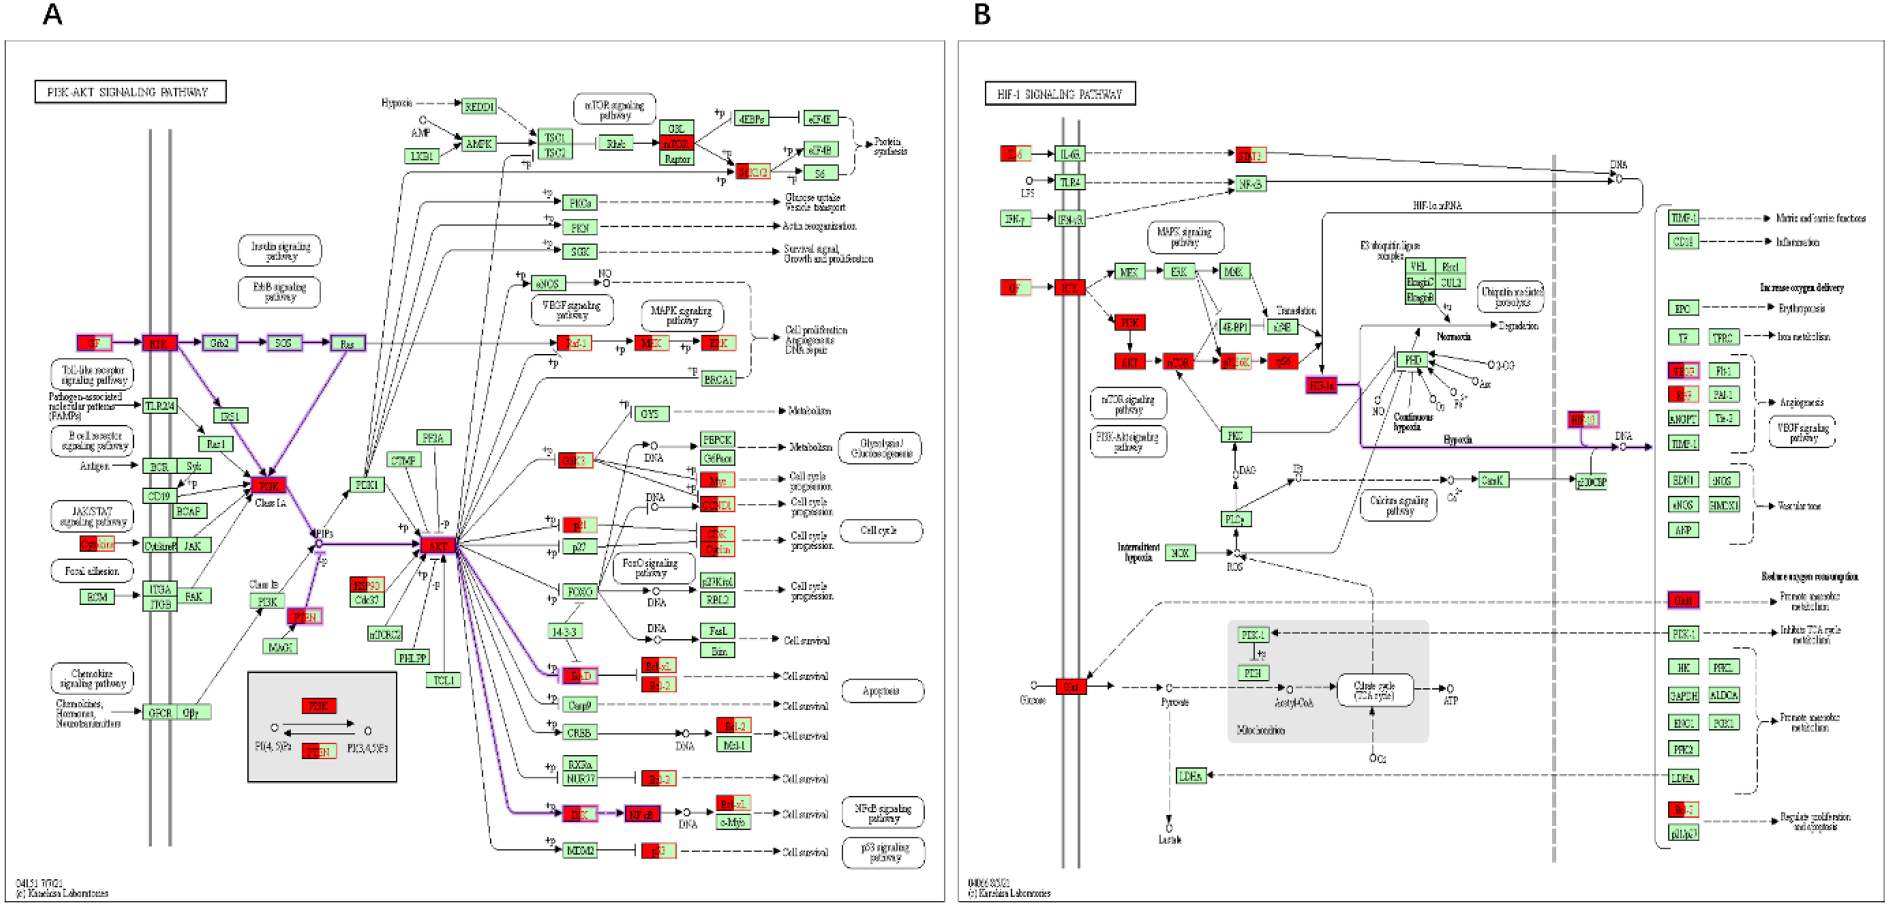 Main pathways were colored using a KEGG mapper. The red color denotes the targets of the herb pair C. Rhizoma-ginger regulation in colon cancer. (A) PI3K-Akt signaling pathway. (B) HIF-1 signaling pathway.